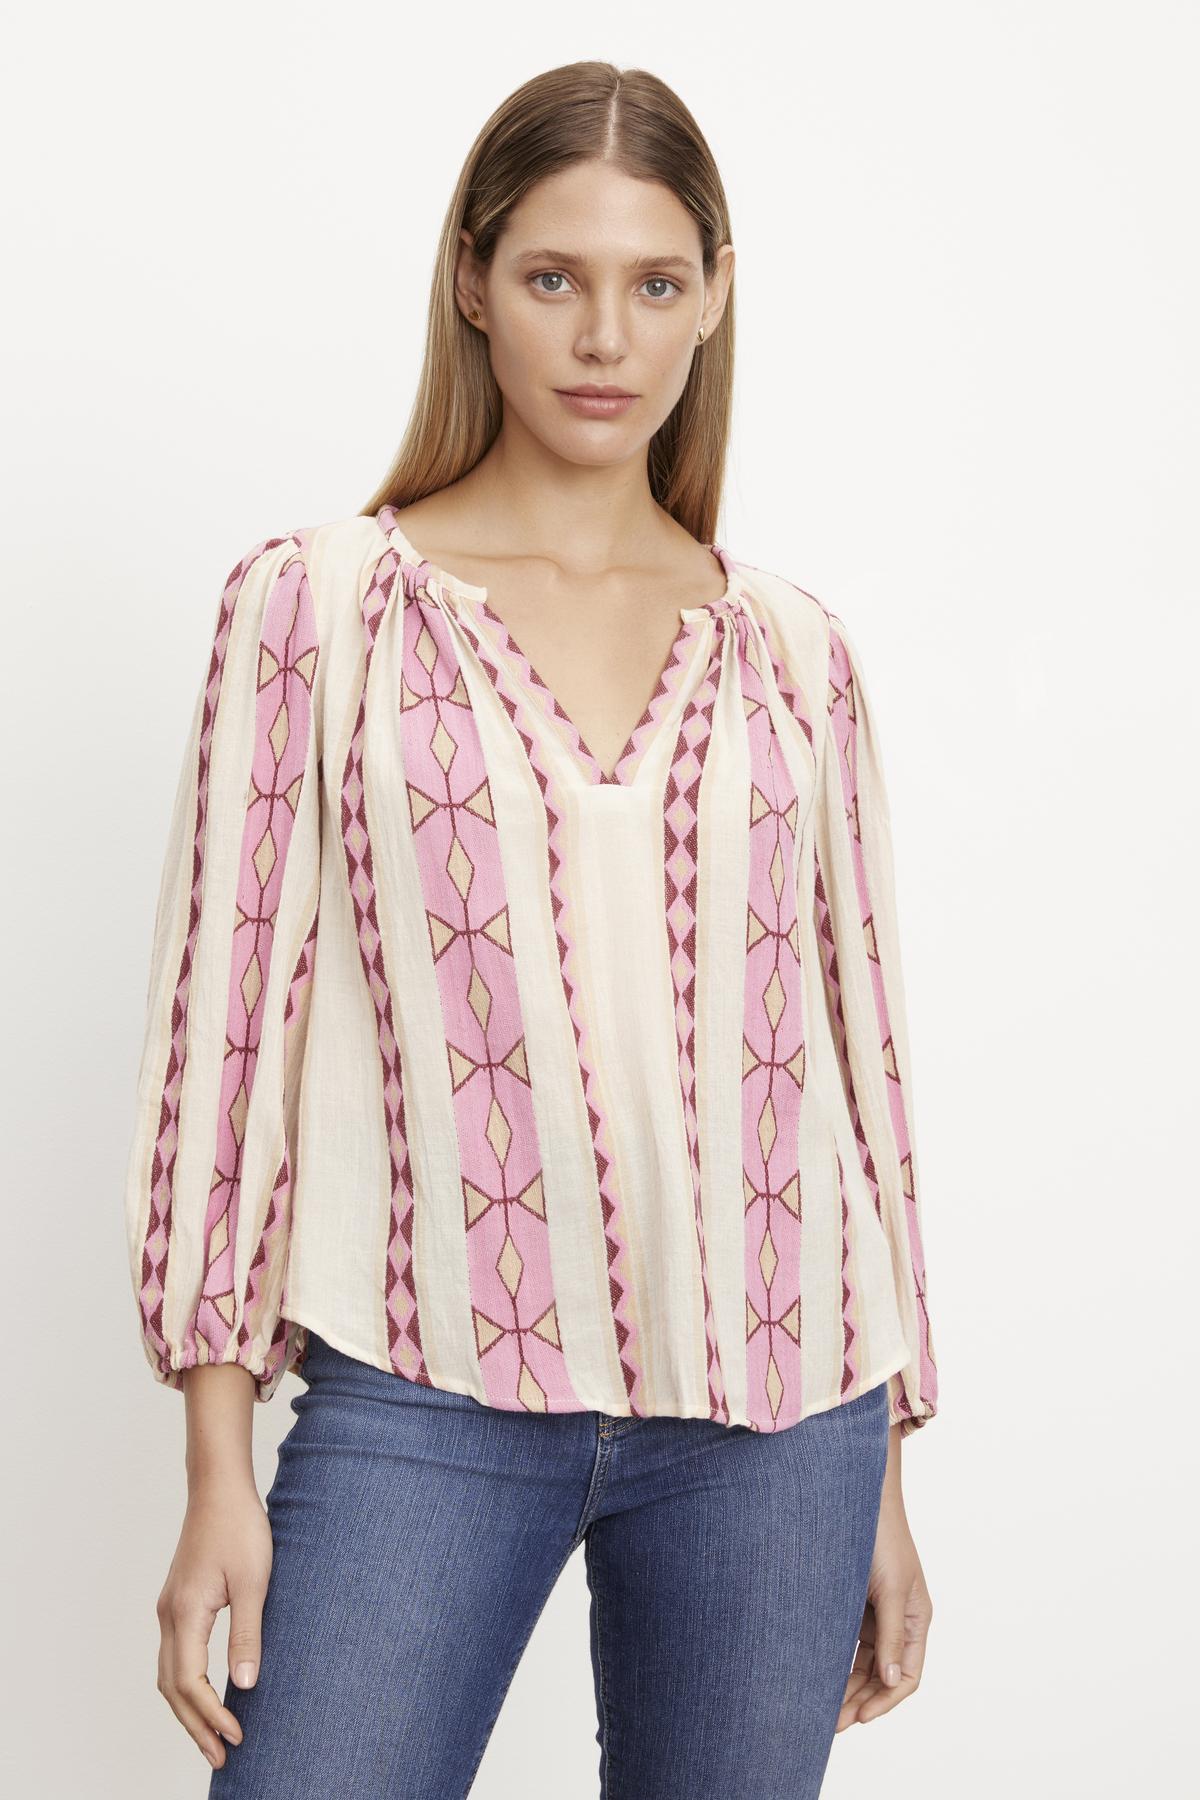   The model is wearing a pink Velvet by Graham & Spencer NANNI JACQUARD V-NECK BLOUSE with elastic cuffs. 